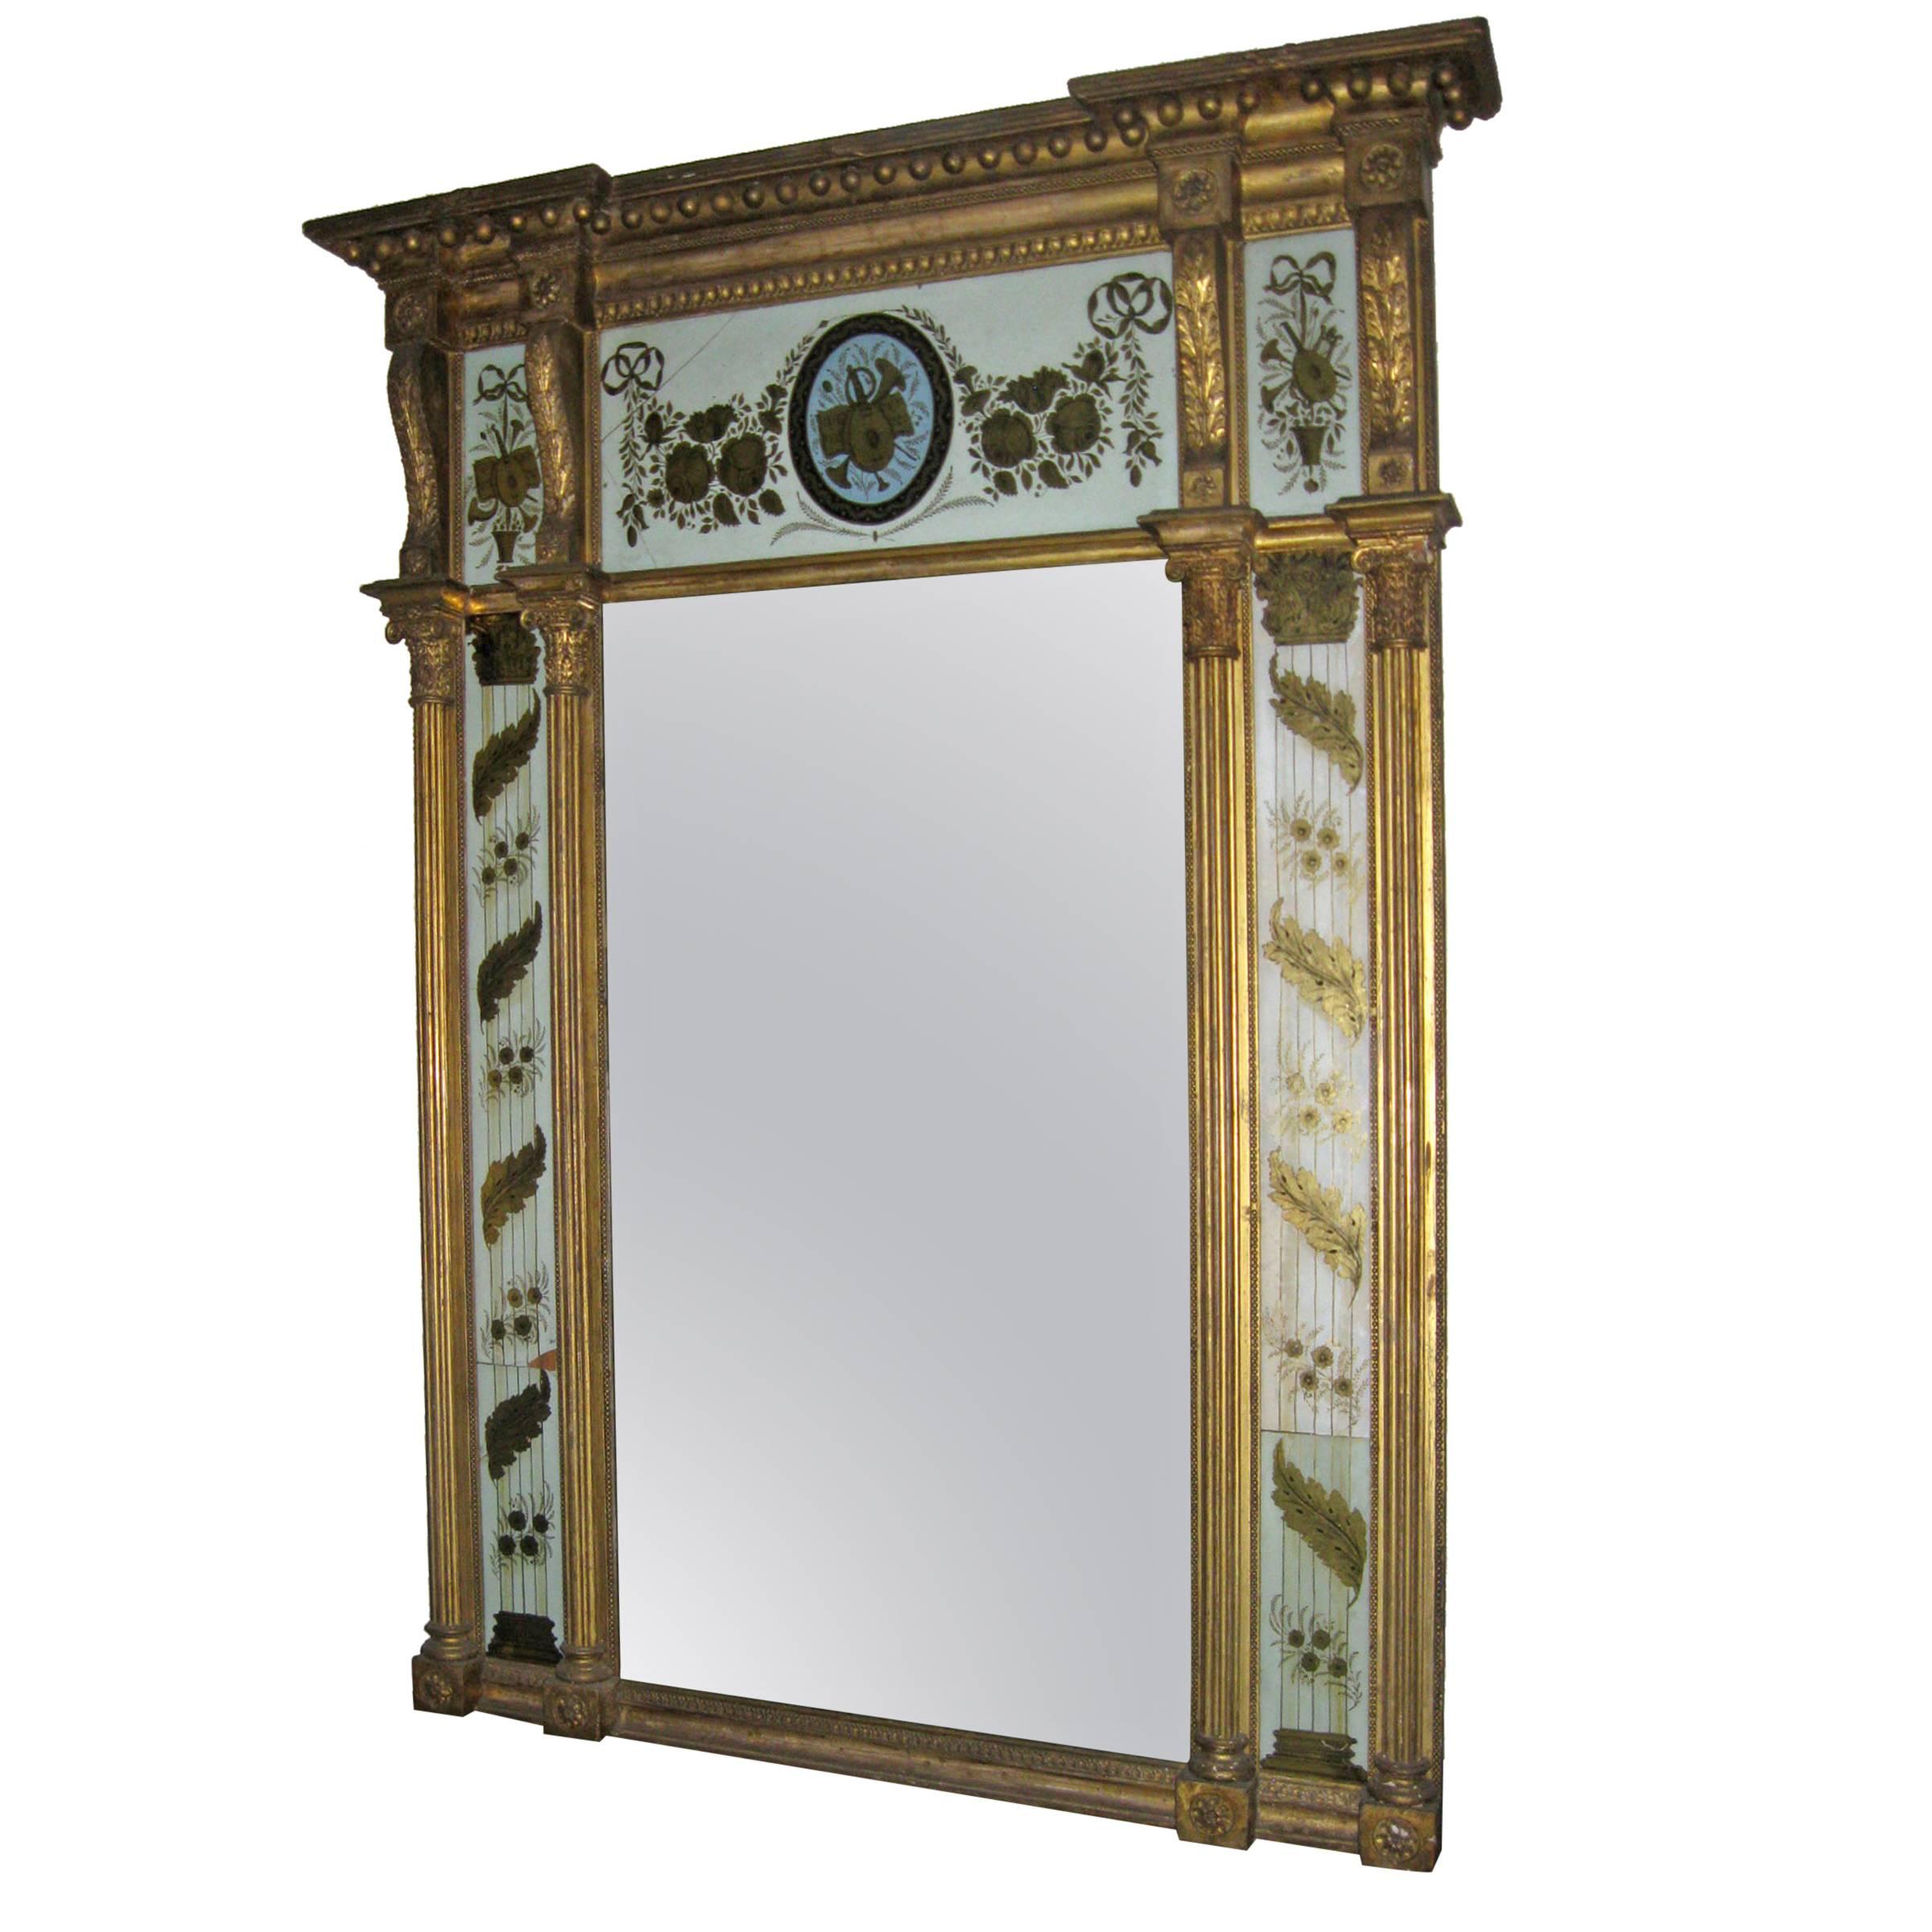 19th century American Classical Federal Monumental Eglomise Overmantel Mirror For Sale